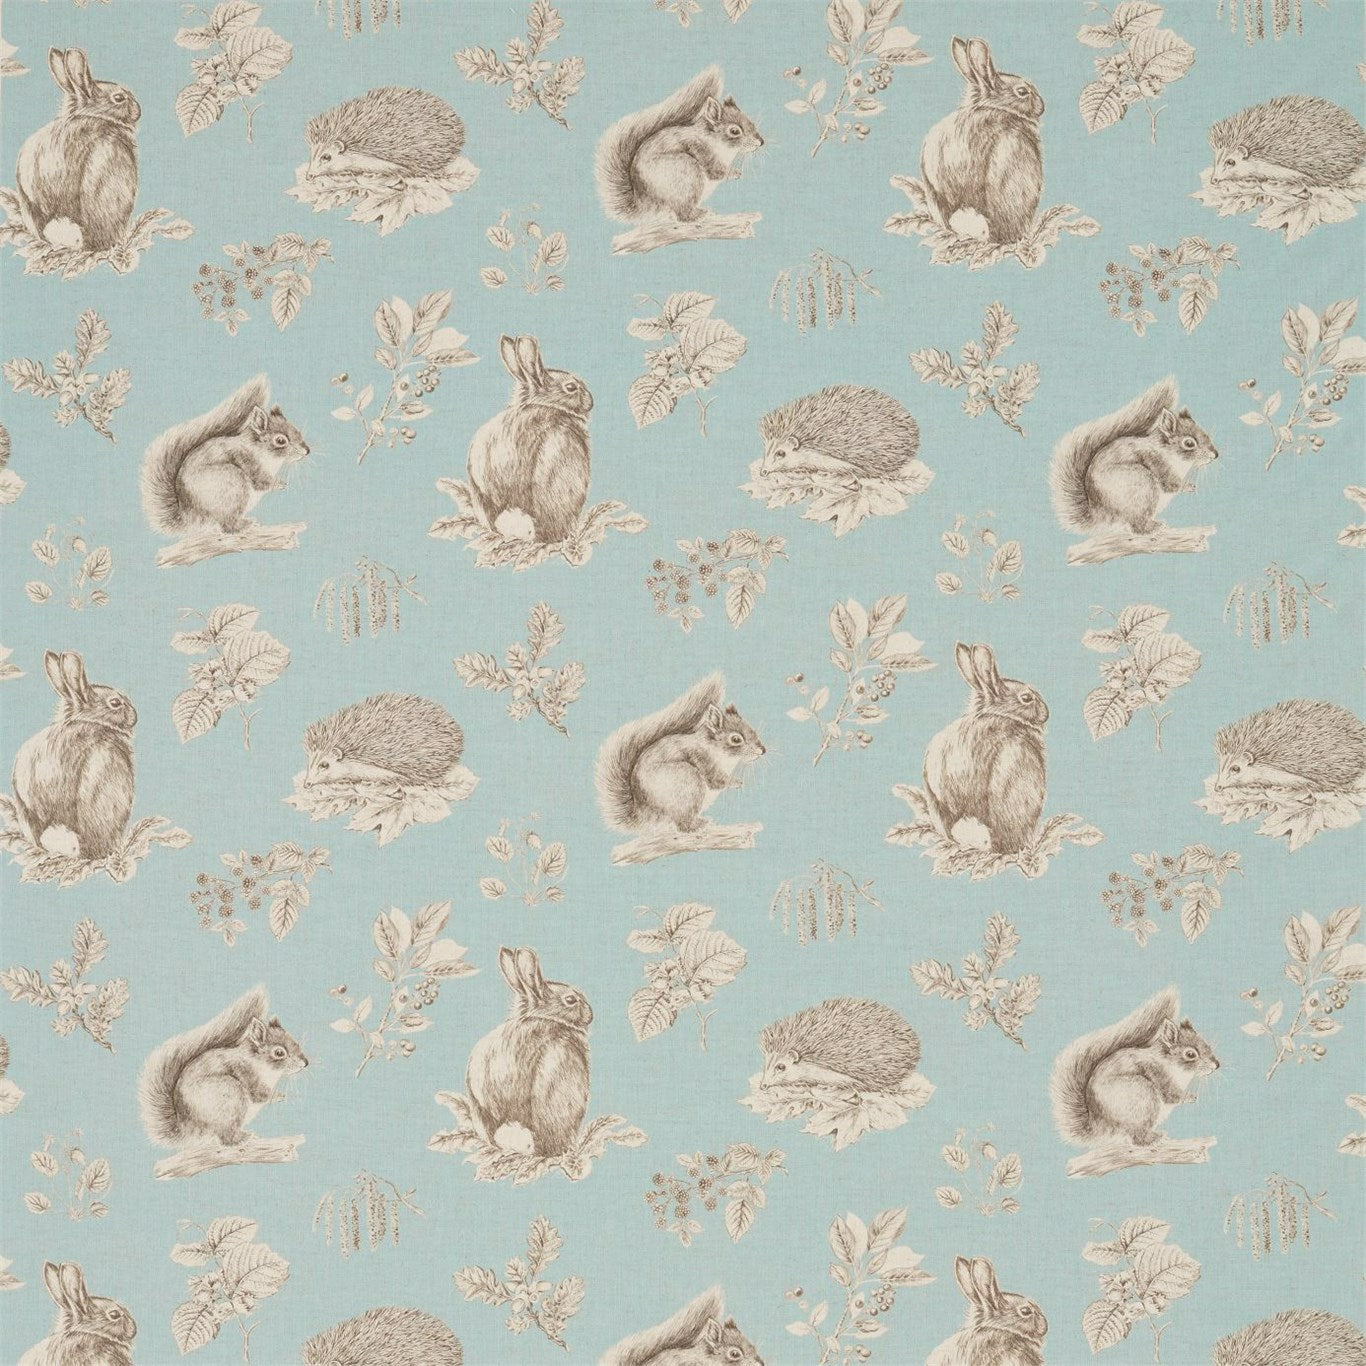 Squirrel and Hedgehog Sky Blue/Pebble Fabric By Sanderson